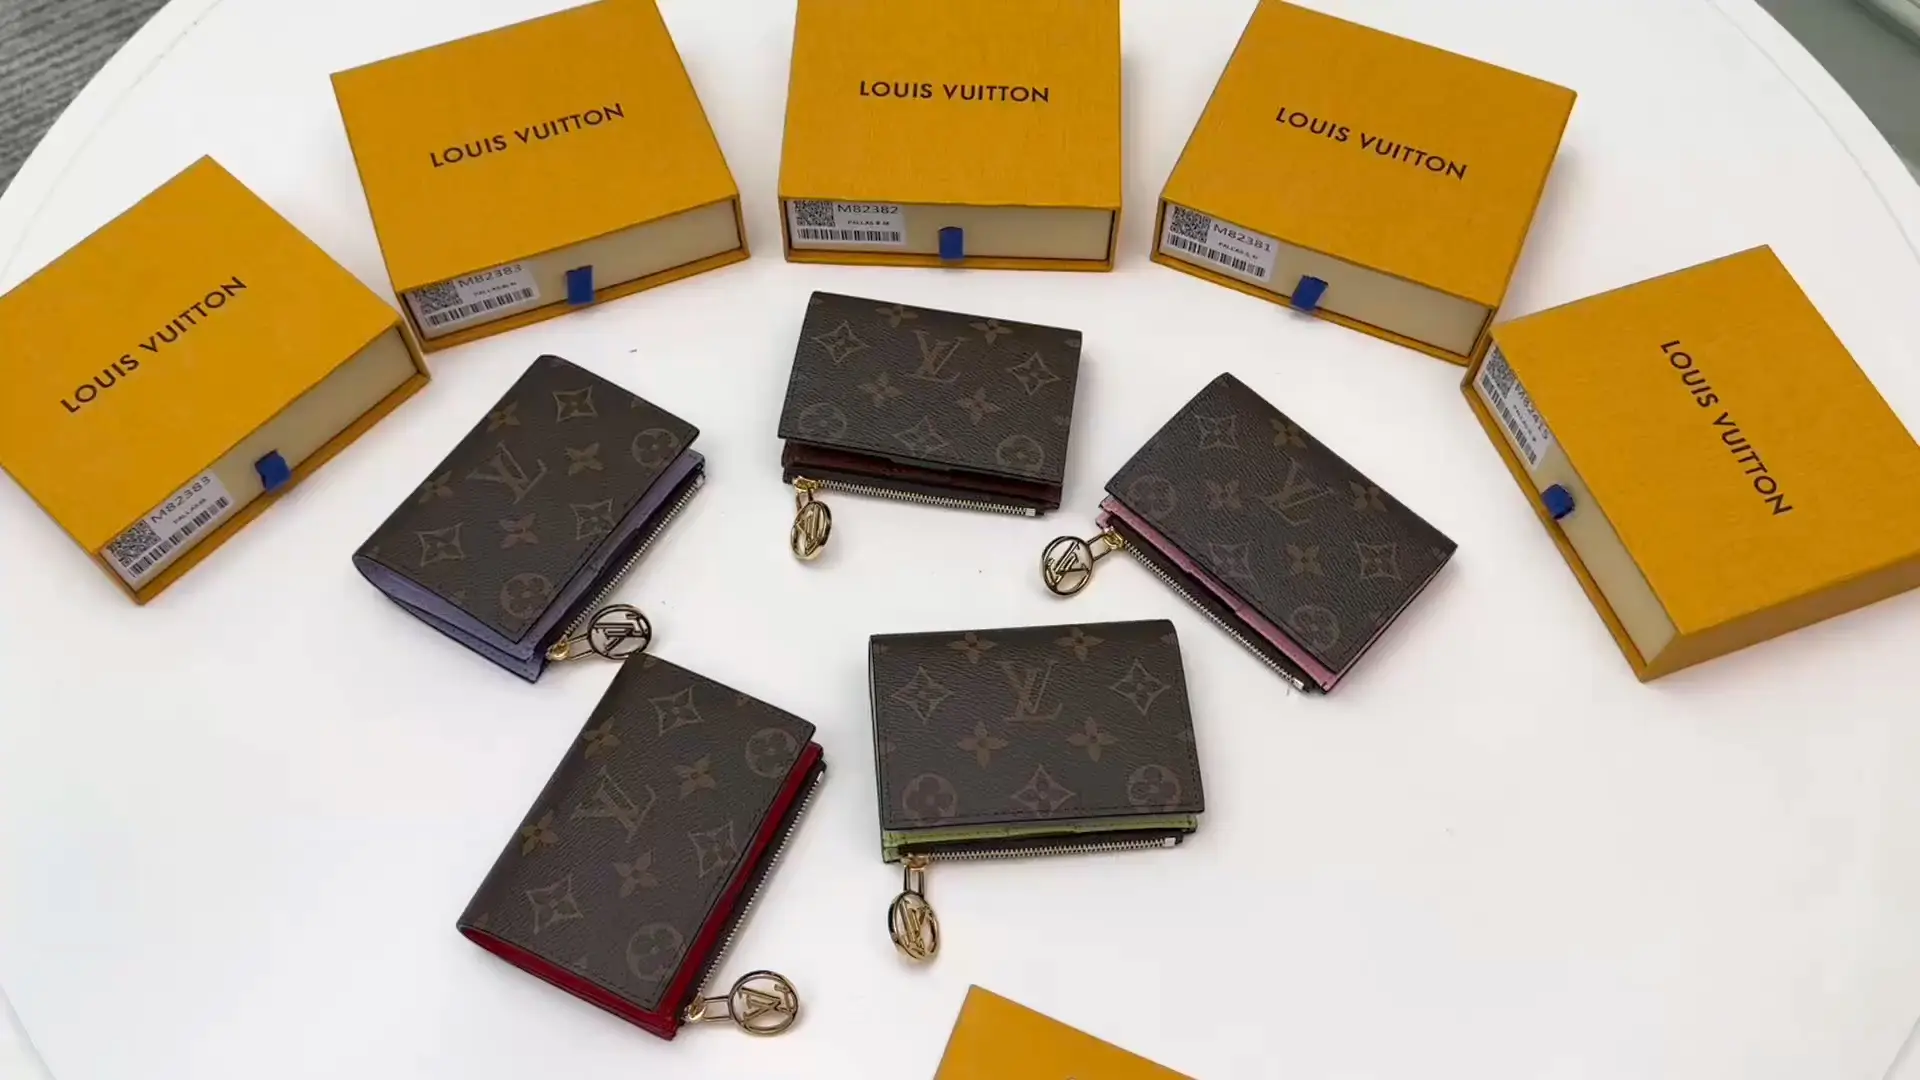 Unboxing Louis Vuitton Box Scott Gifting collection 